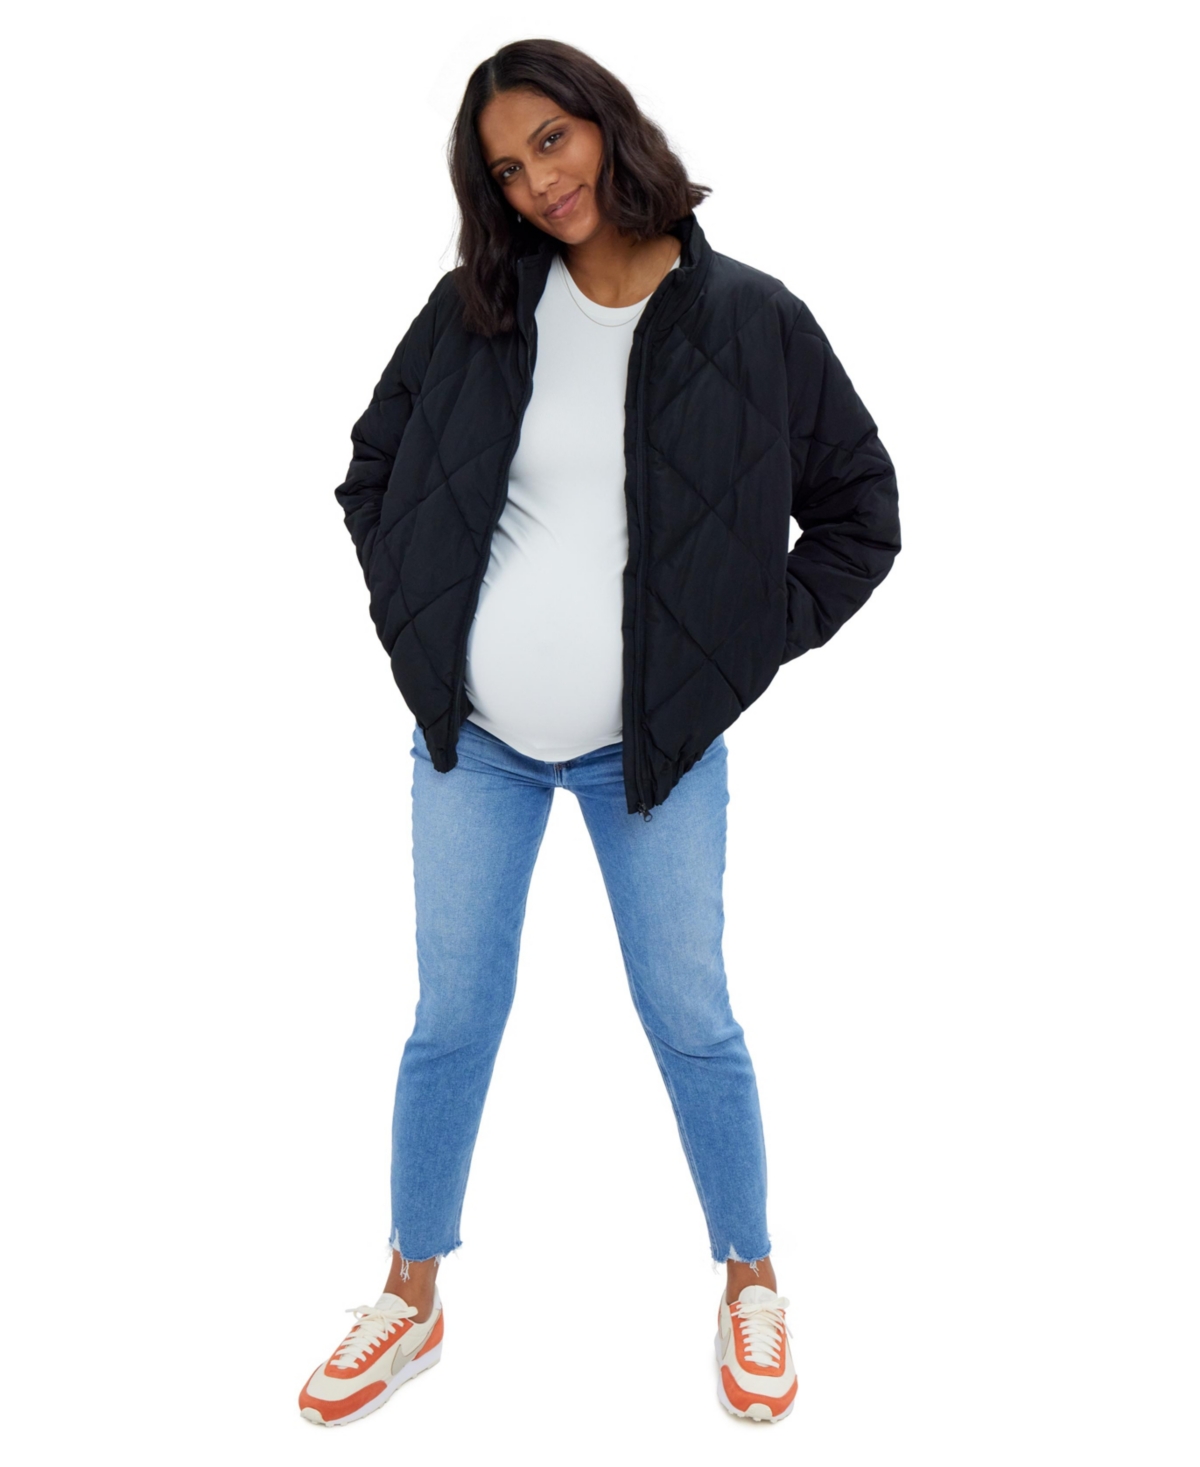 Ingrid + Isabel Women's Maternity Grow With You Puffer Jacket - Black